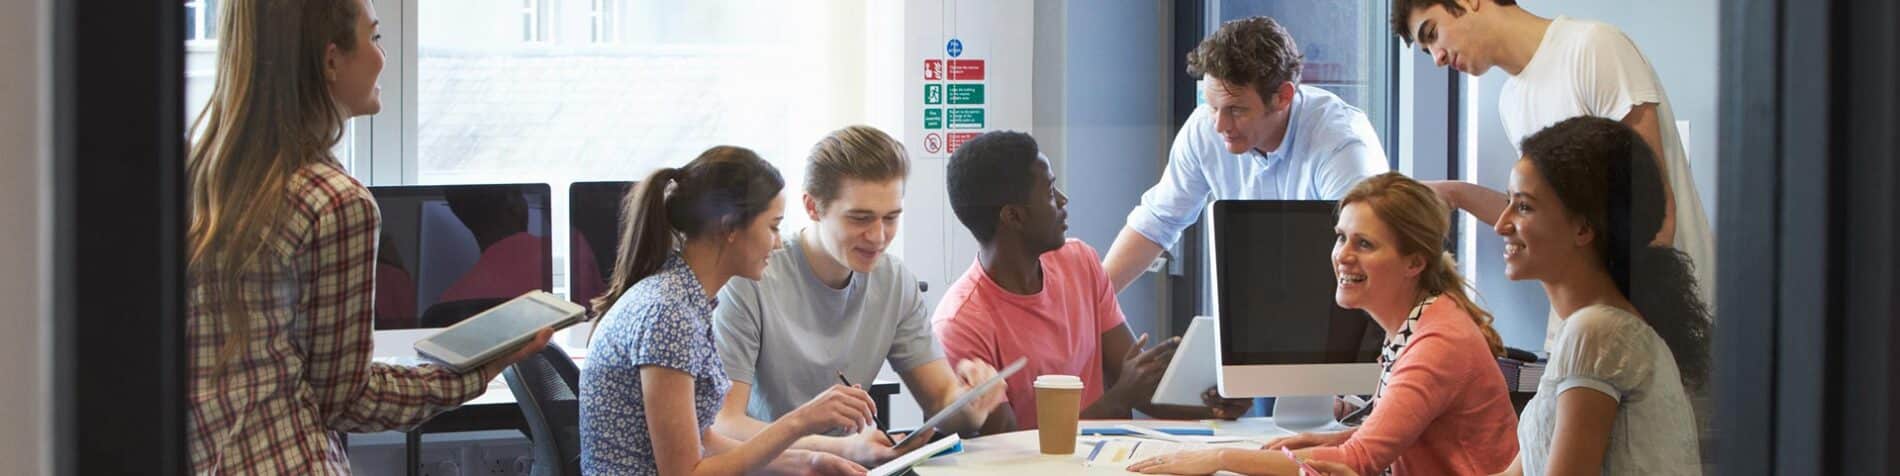 SAP Training and Adoption Enhances Digital Learning to Foster People and Business Success